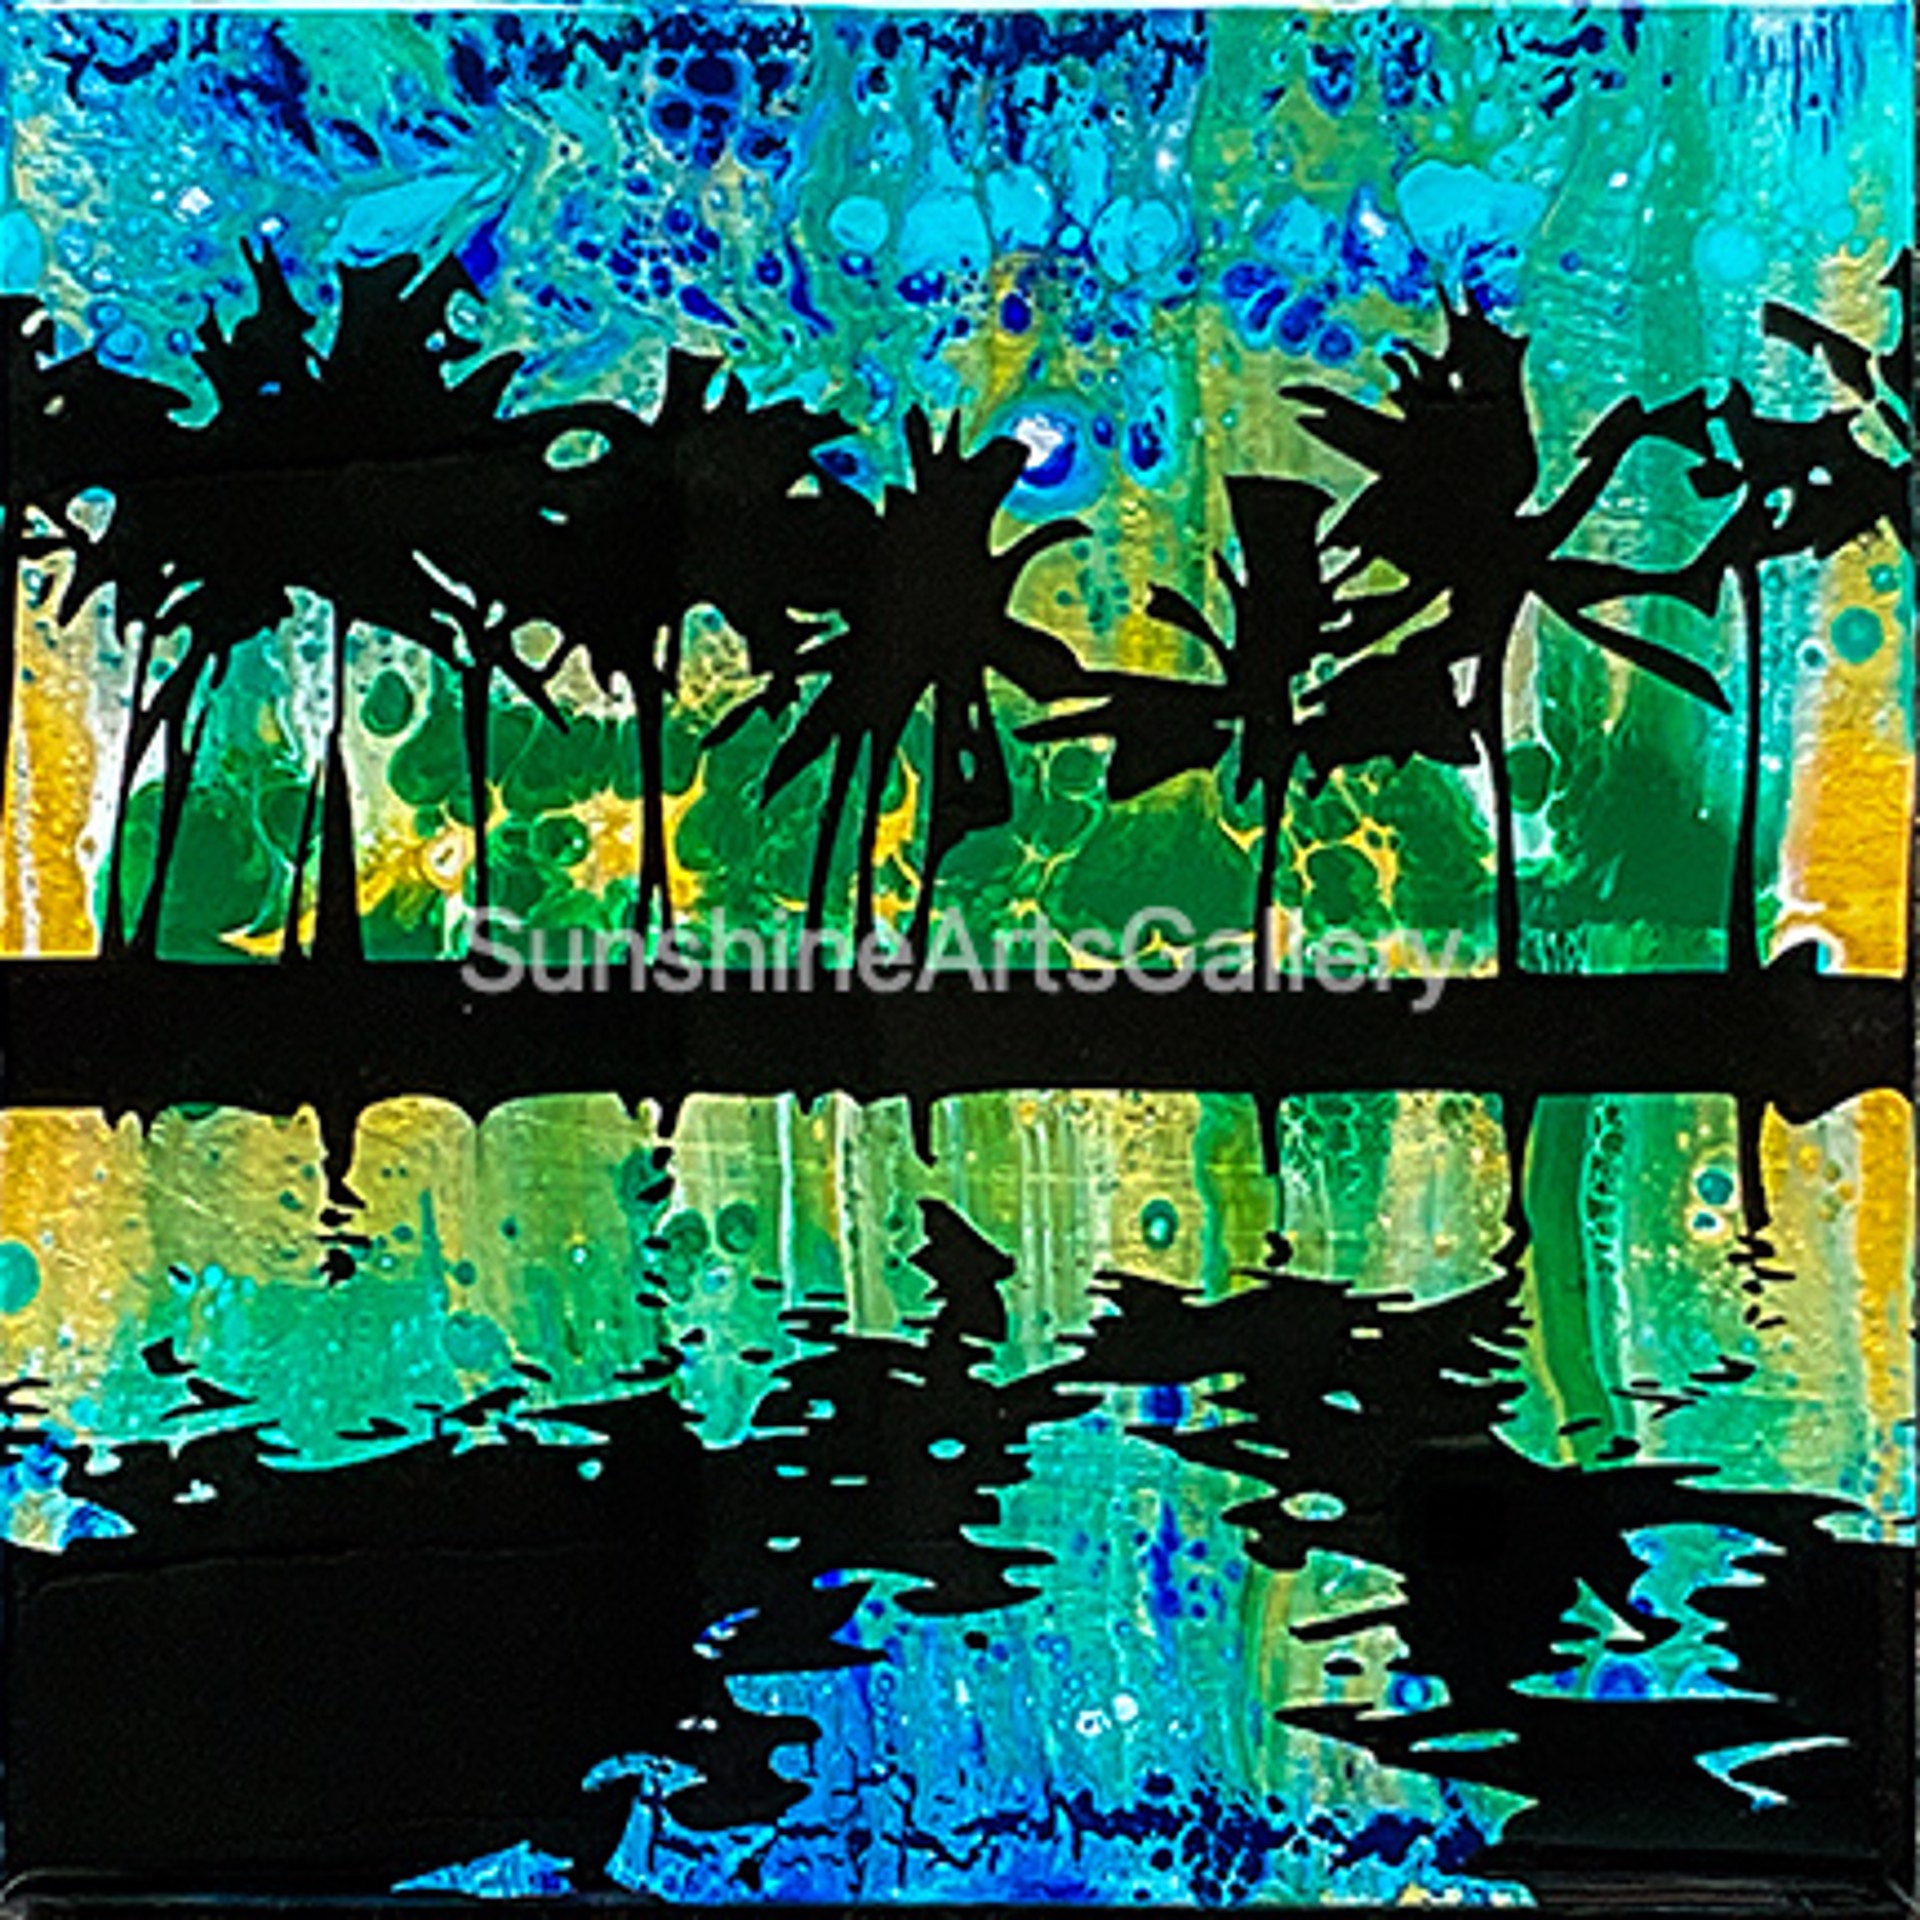 Palm Ocean Reflections by Pati O'Neal